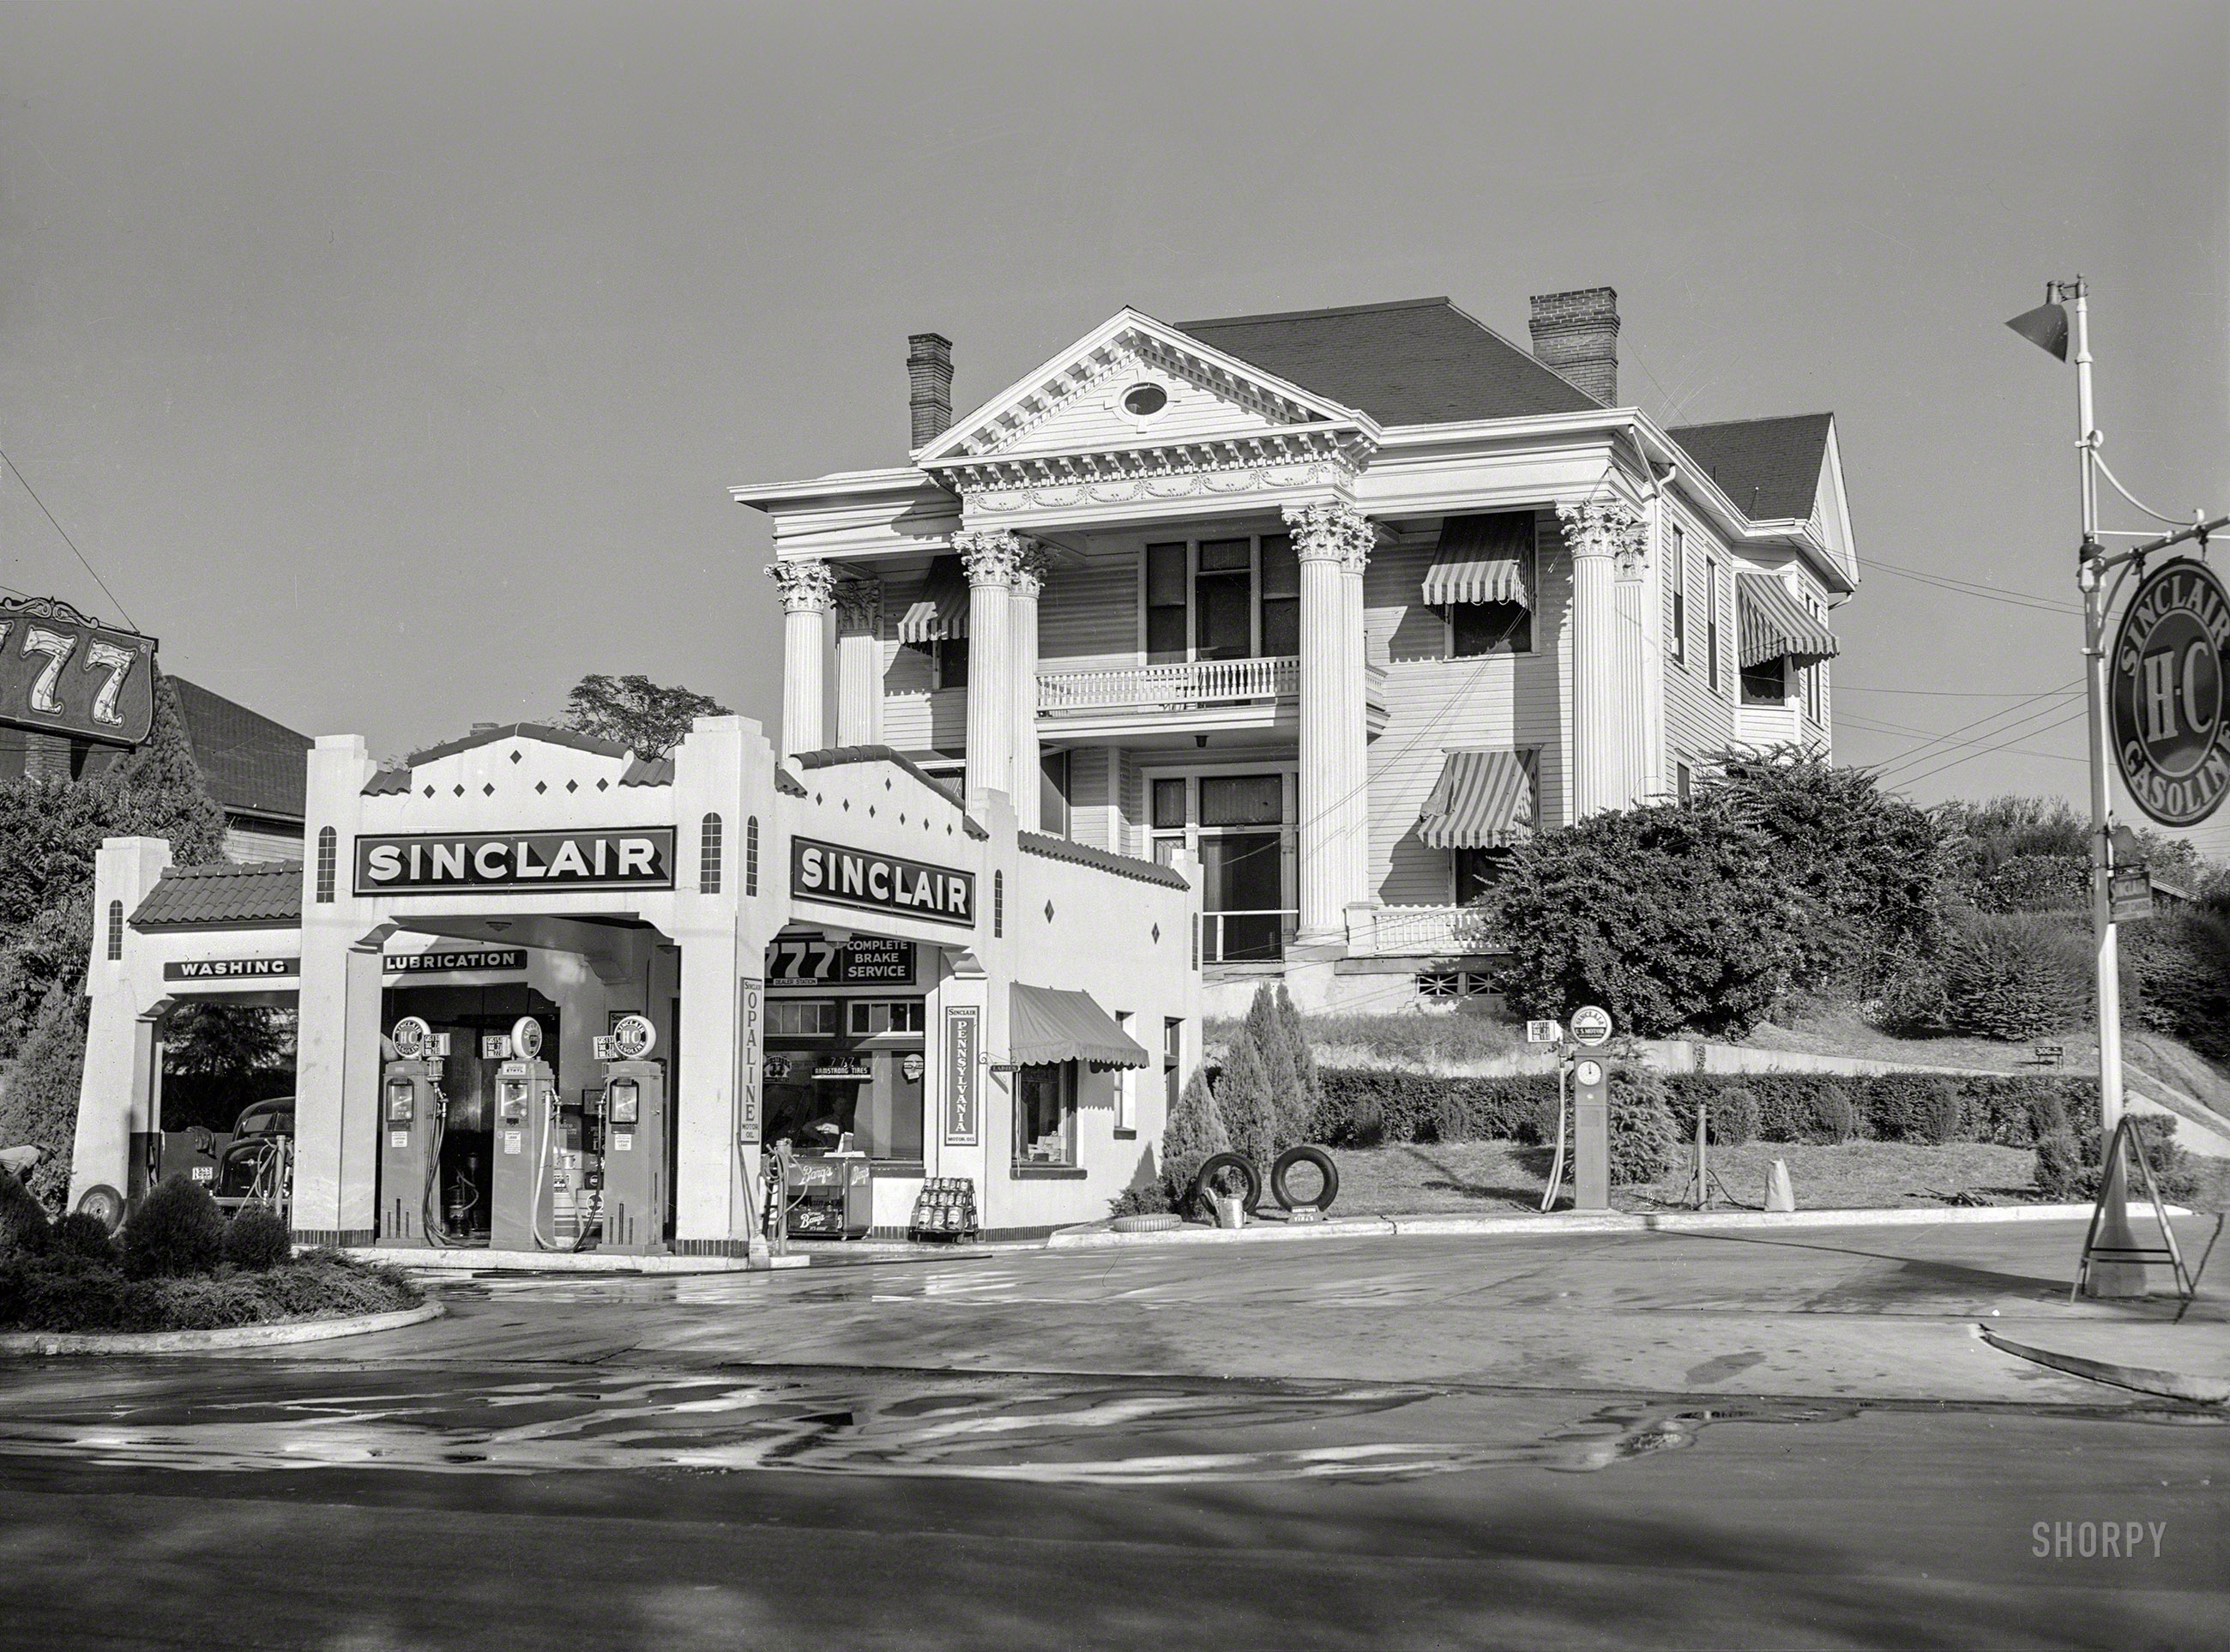 November 1939. "Gas station in front of old colonial house (306 North State Street). Jackson, Mississippi Delta." The 777 Service Station, pumping Sinclair "H-C" gasoline. Acetate negative by Marion Post Wolcott. View full size.